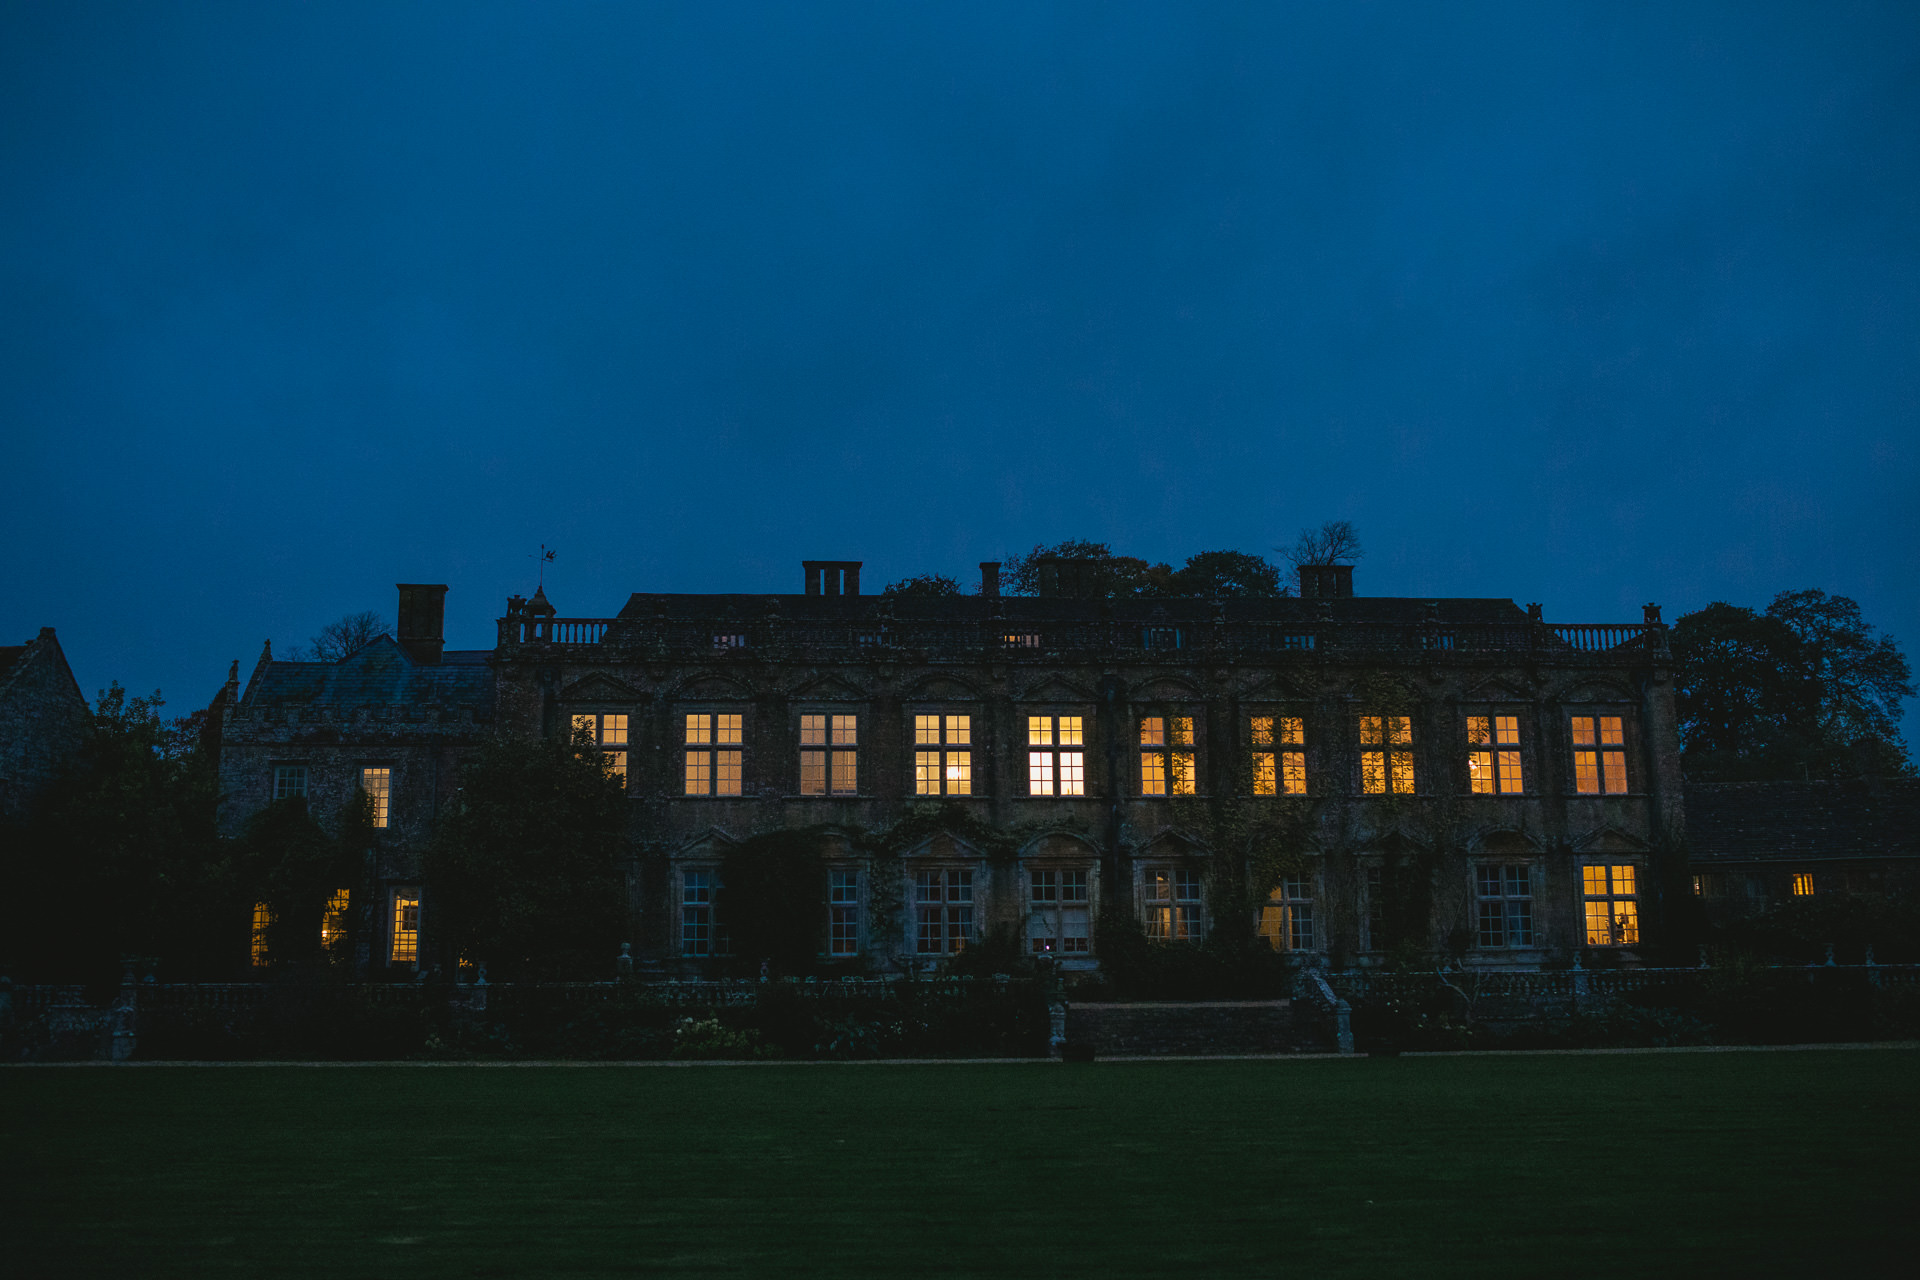 Outside image of Brympton House in the dark